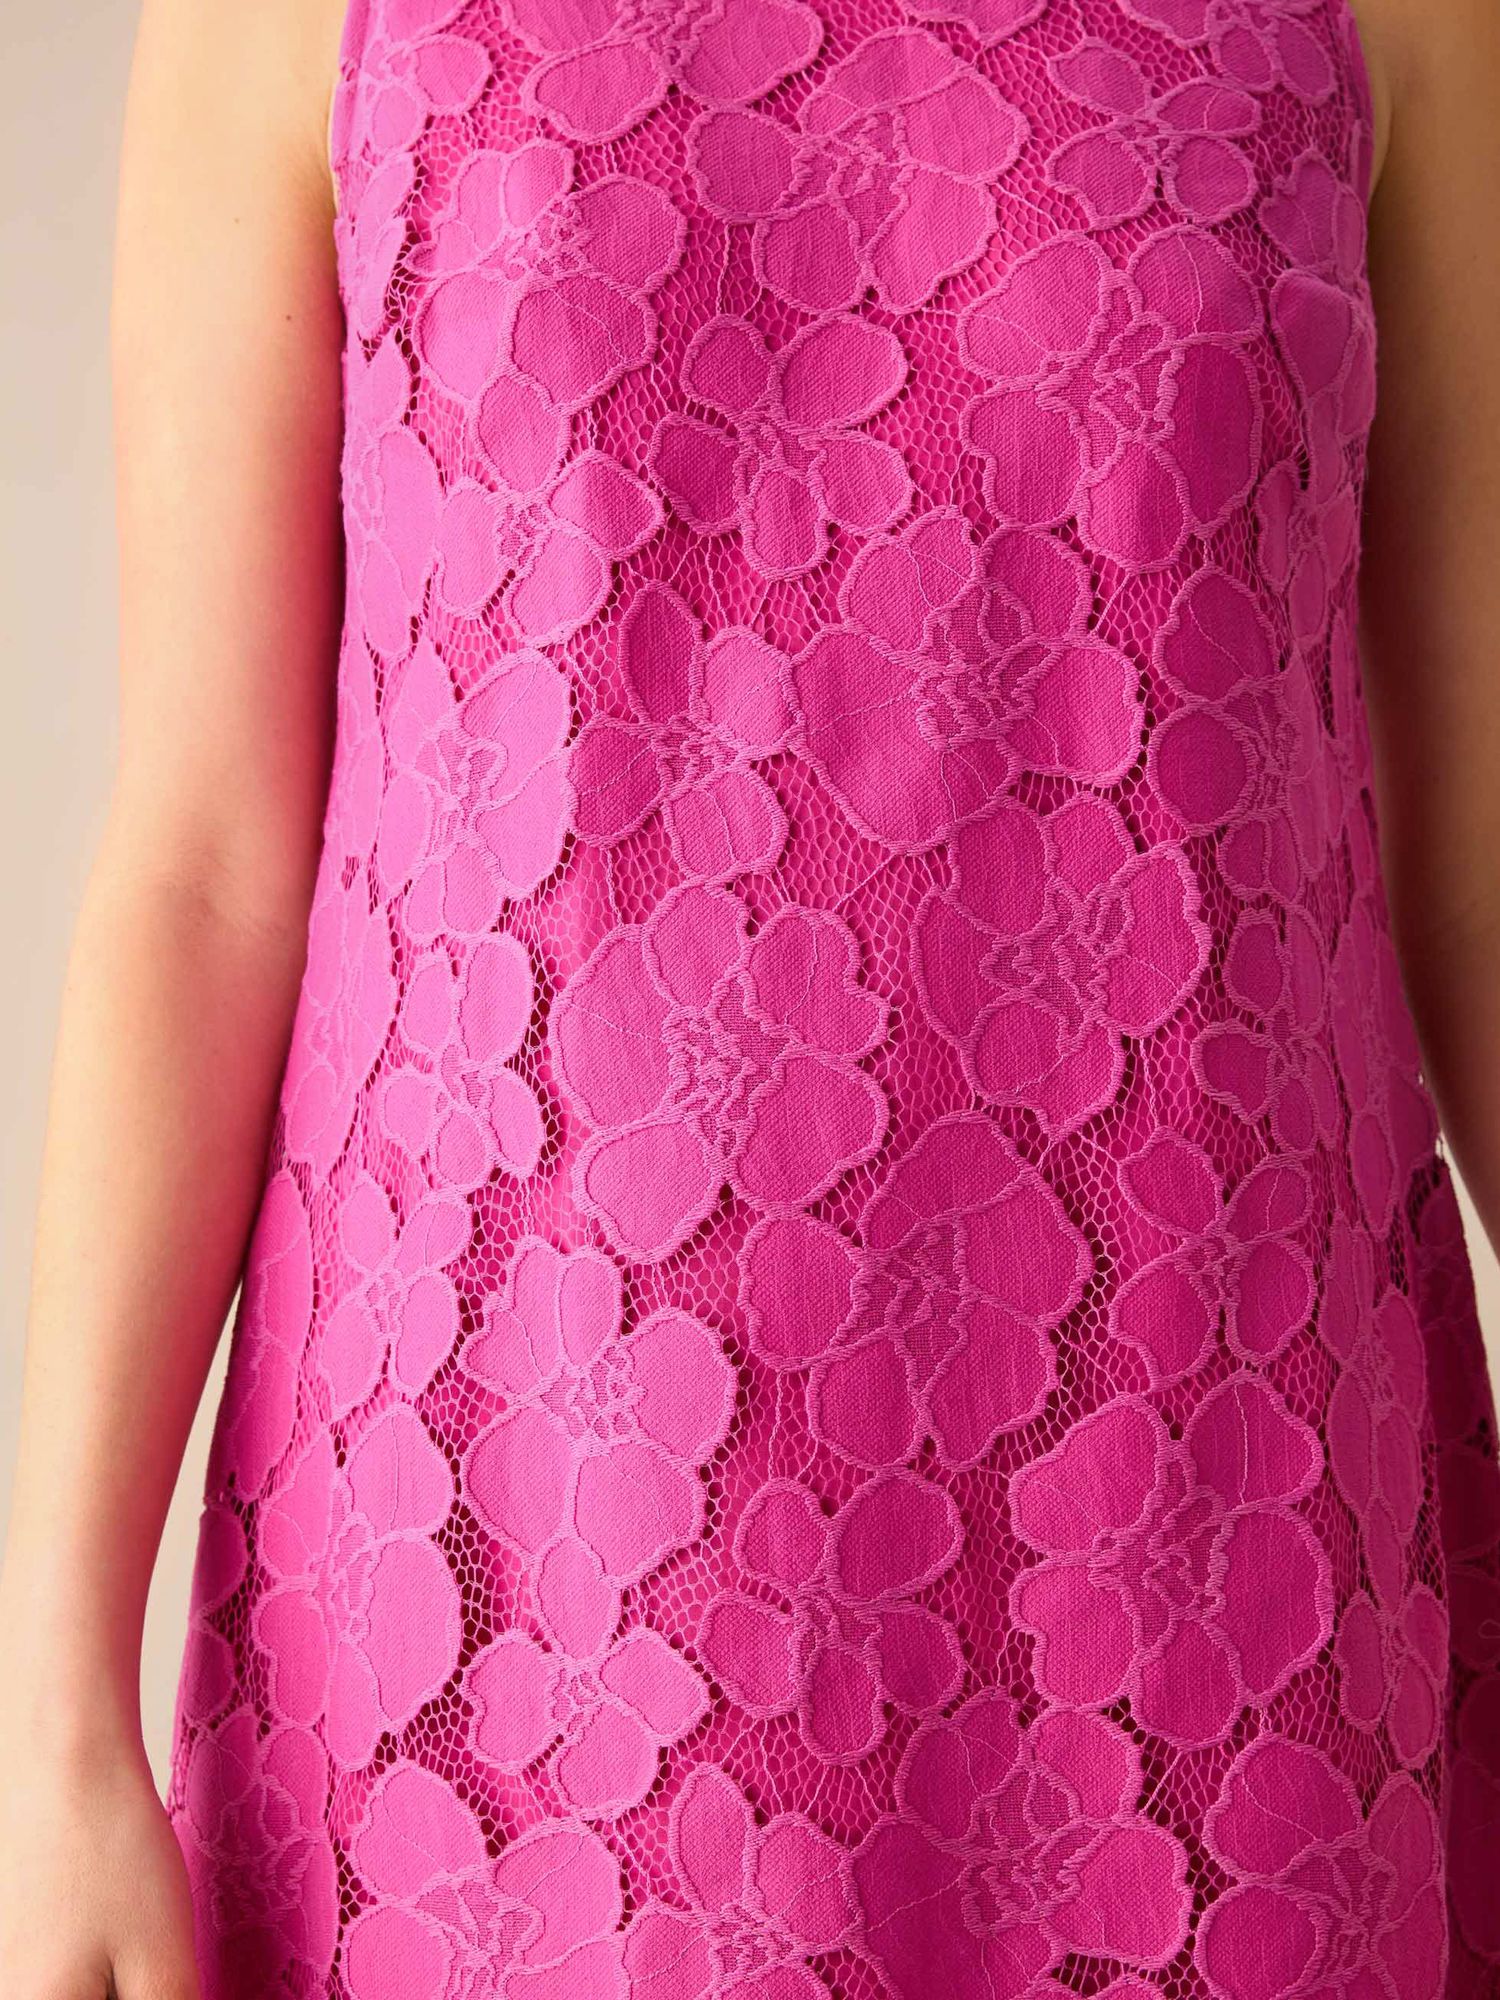 Buy Ro&Zo Floral Lace Mini Shift Dress, Pink Online at johnlewis.com